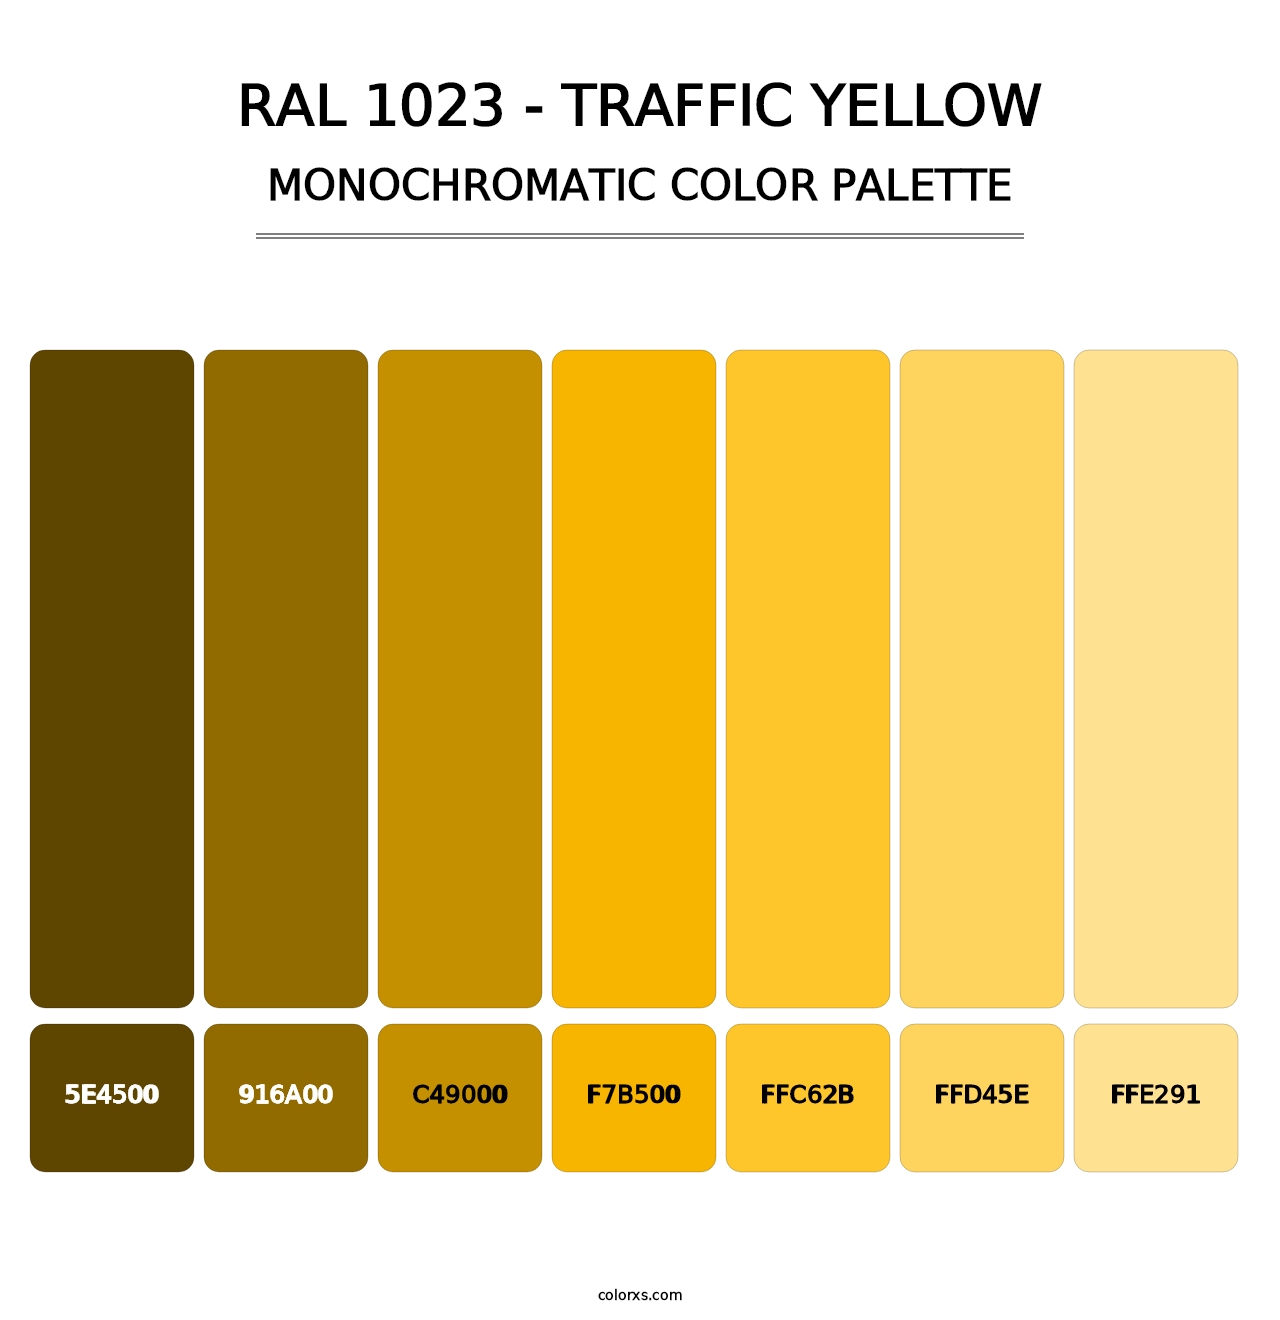 RAL 1023 - Traffic Yellow - Monochromatic Color Palette